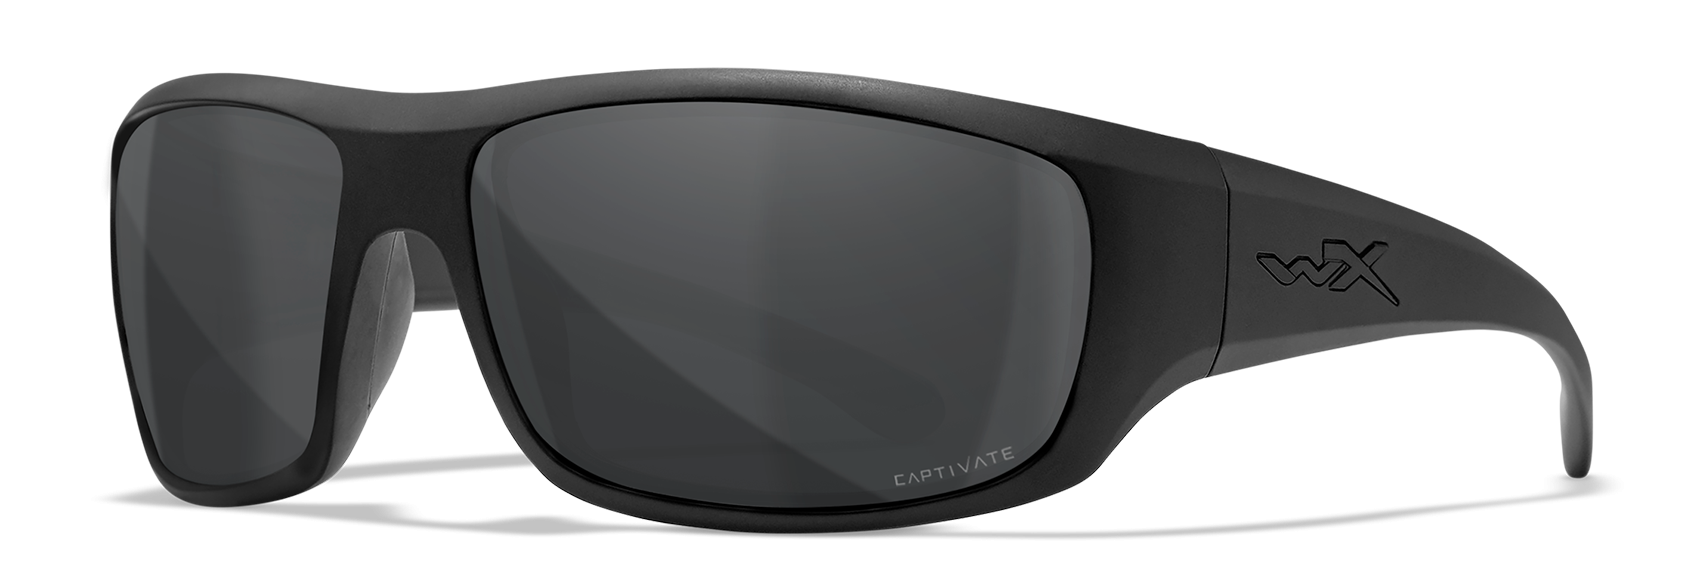 Wiley X WX Omega Gray Lens Polycarbonate Sunglasses